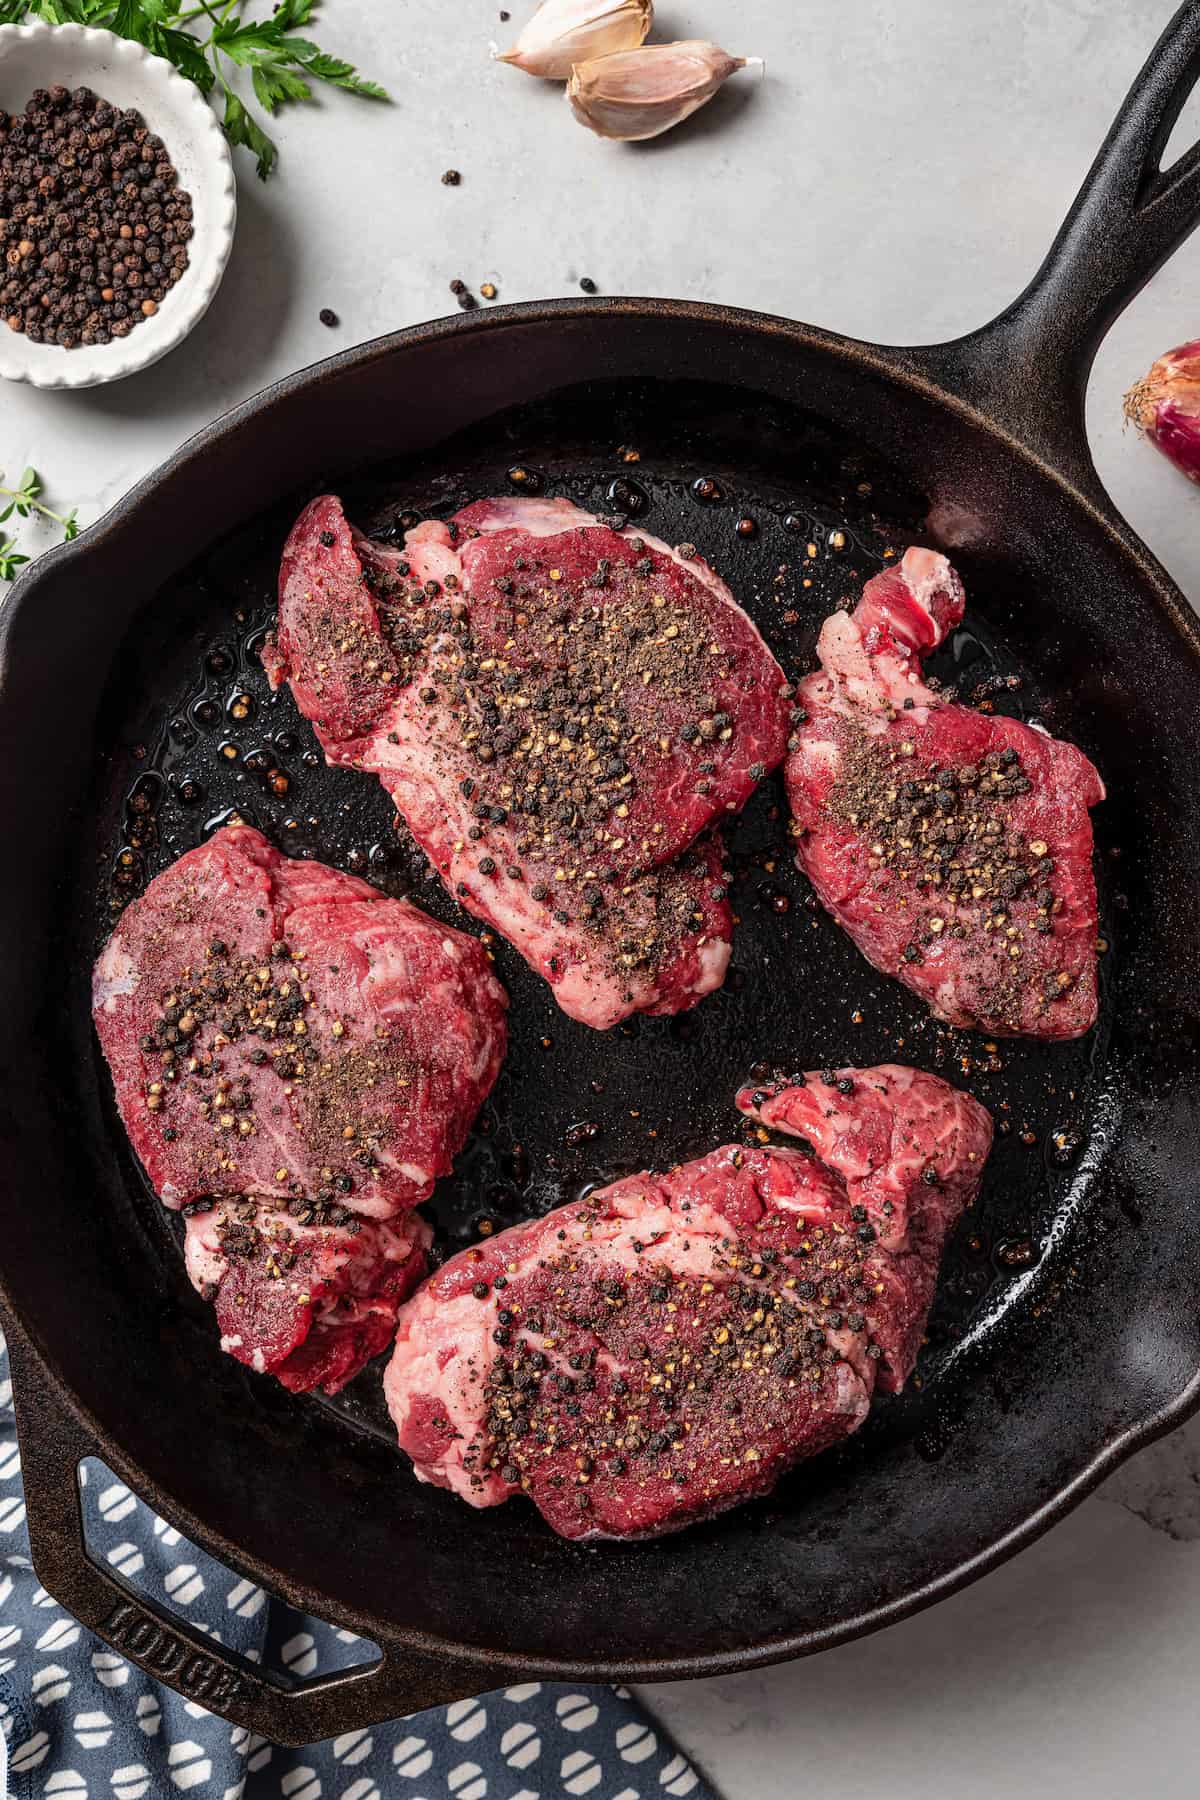 Peppecorn-crusted steaks in a skillet.